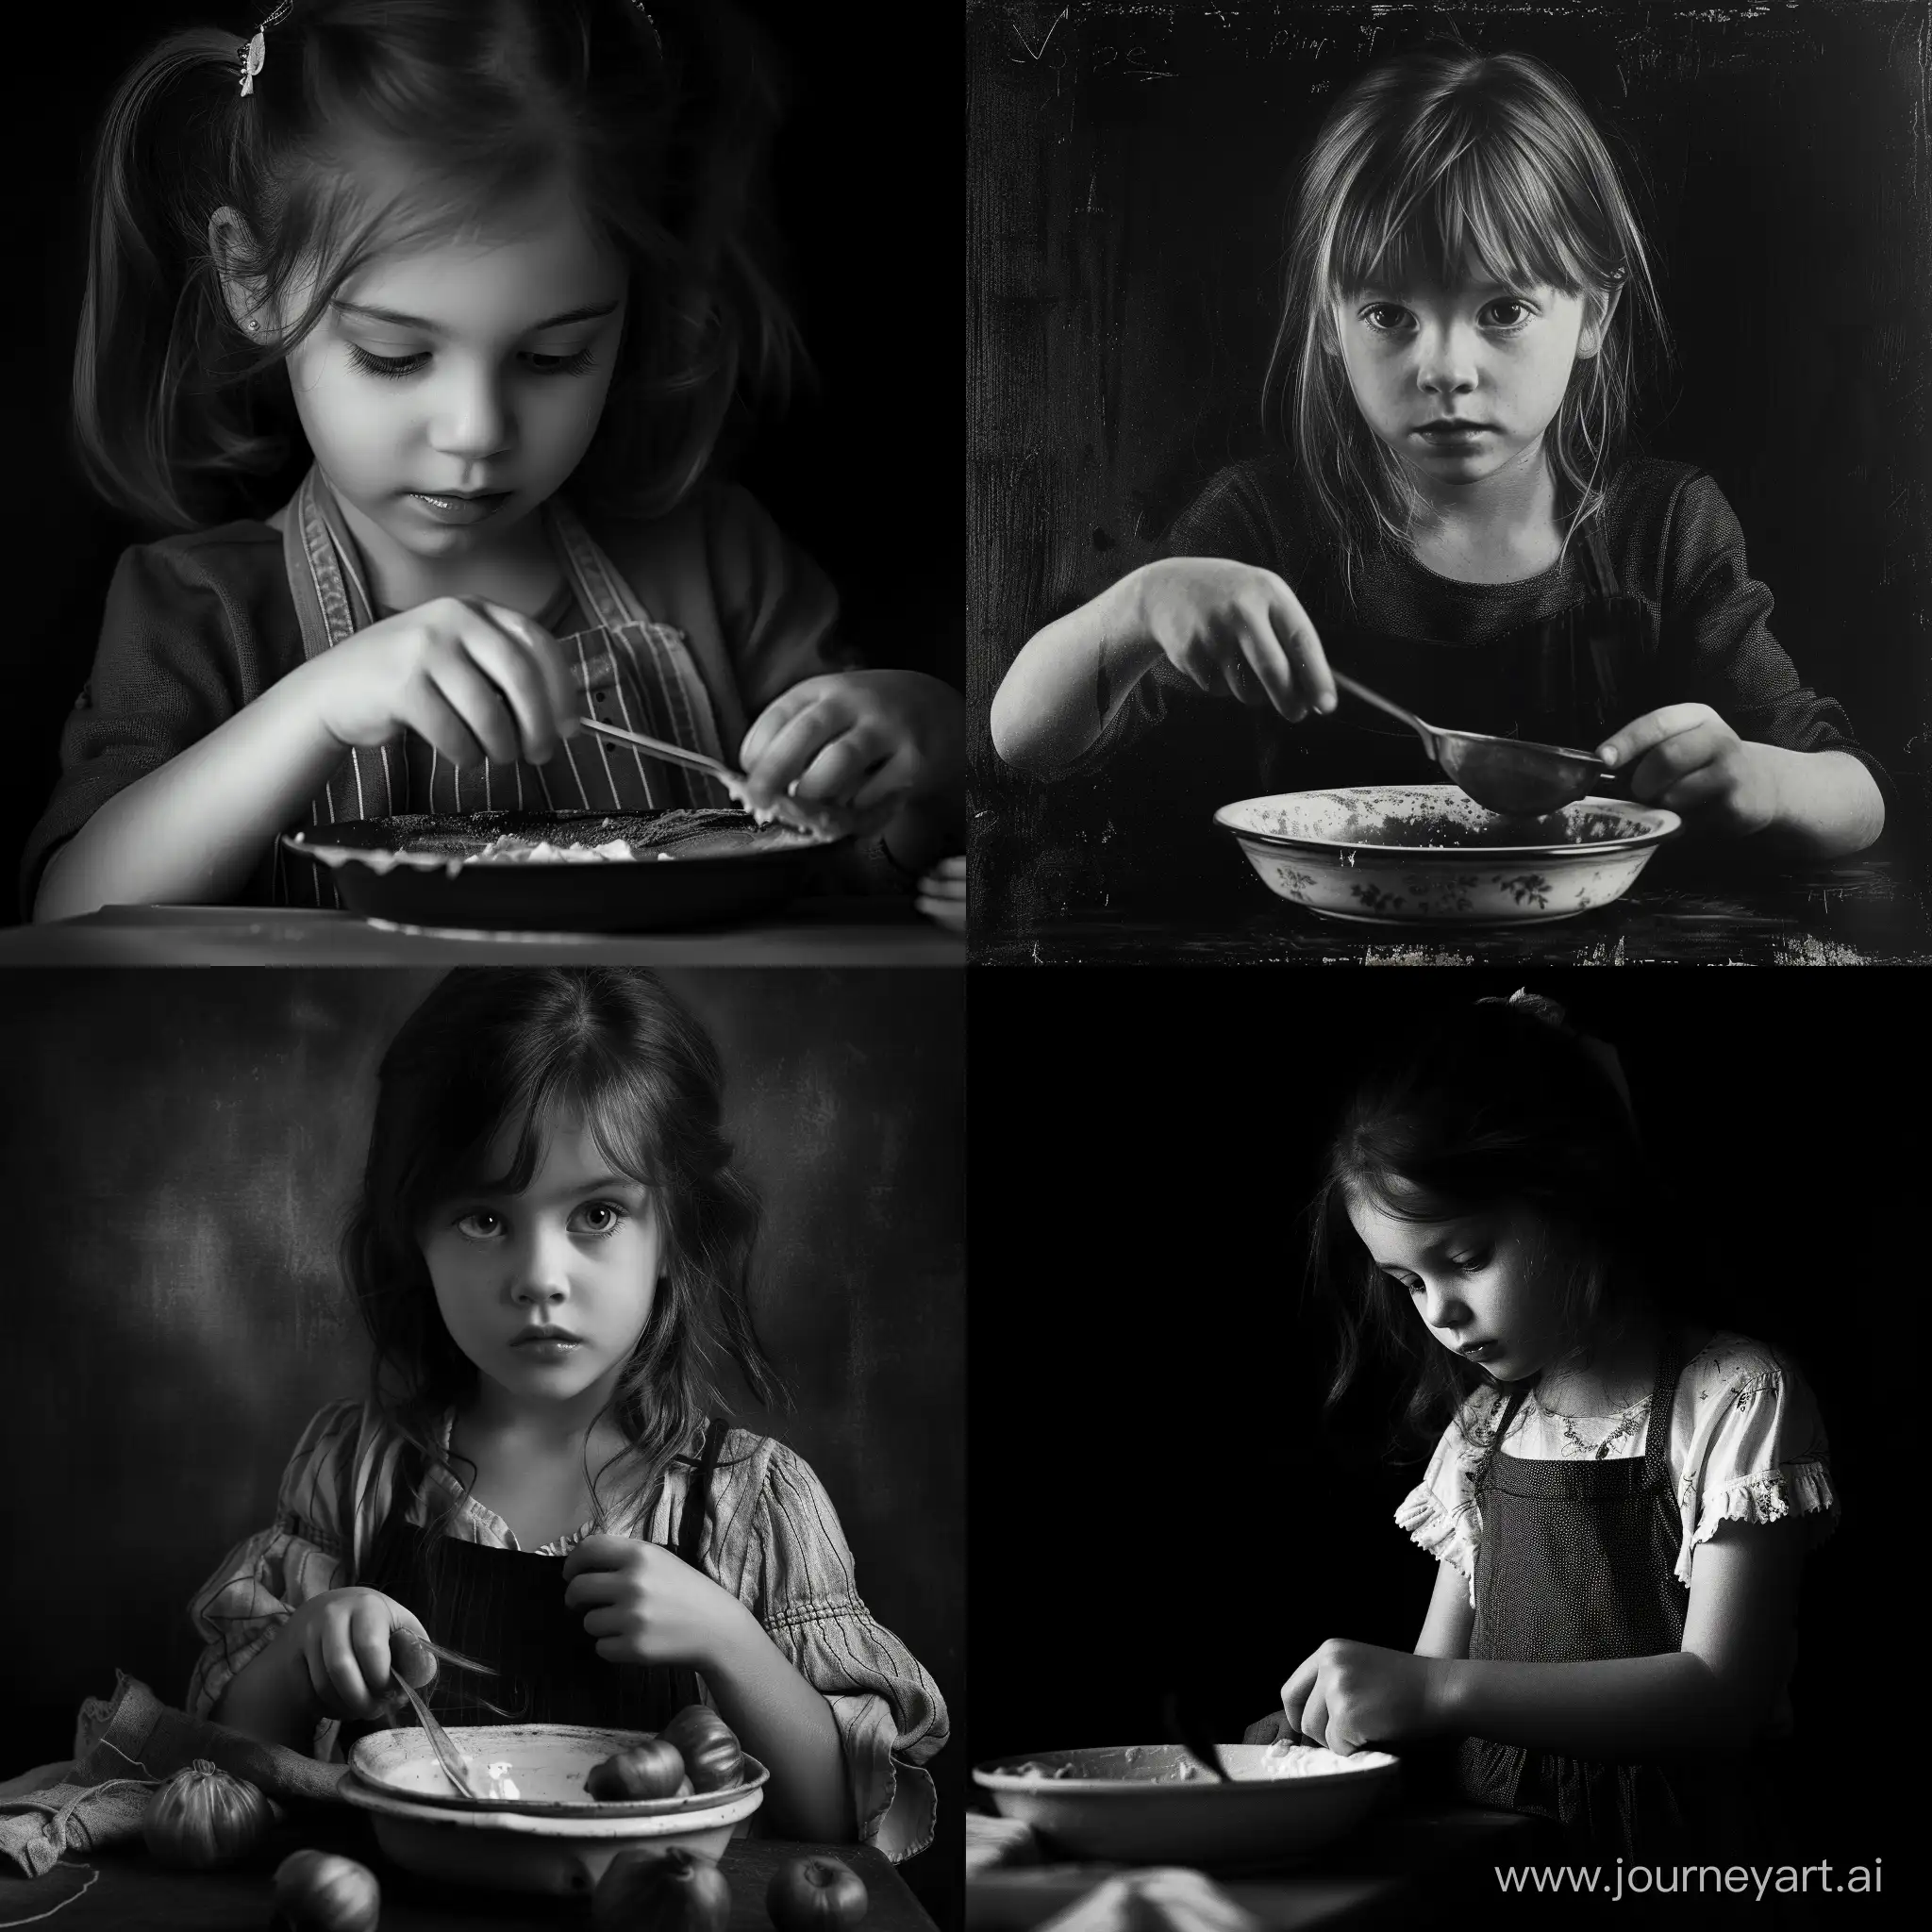 Young-Girl-Cooking-on-a-Black-Canvas-in-Elegant-Black-and-White